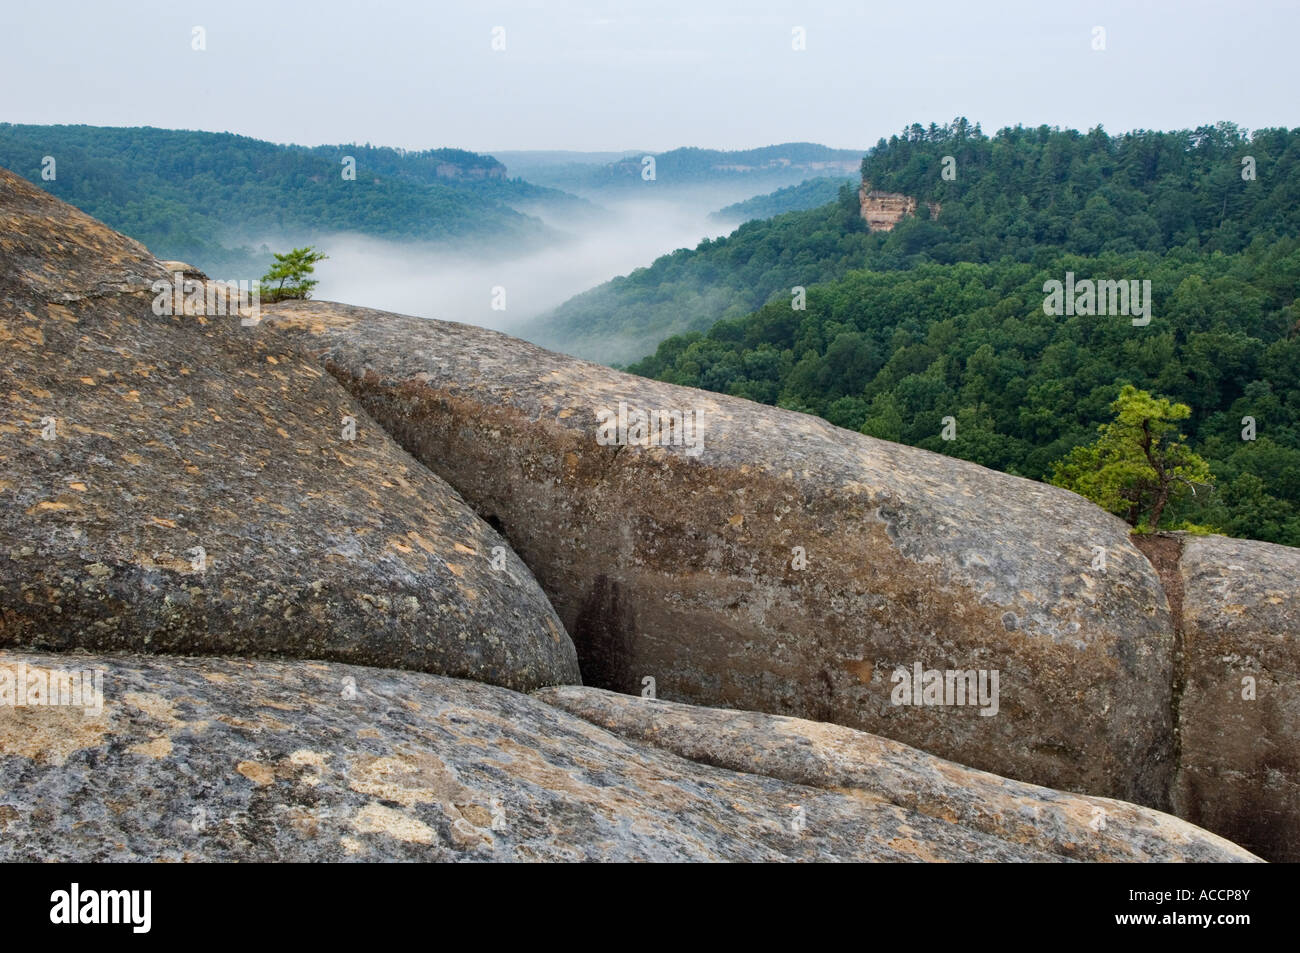 View of Forested Wilderness Area with Morning Mist from Cloud Splitter Red River Gorge Geological Area Kentucky Stock Photo